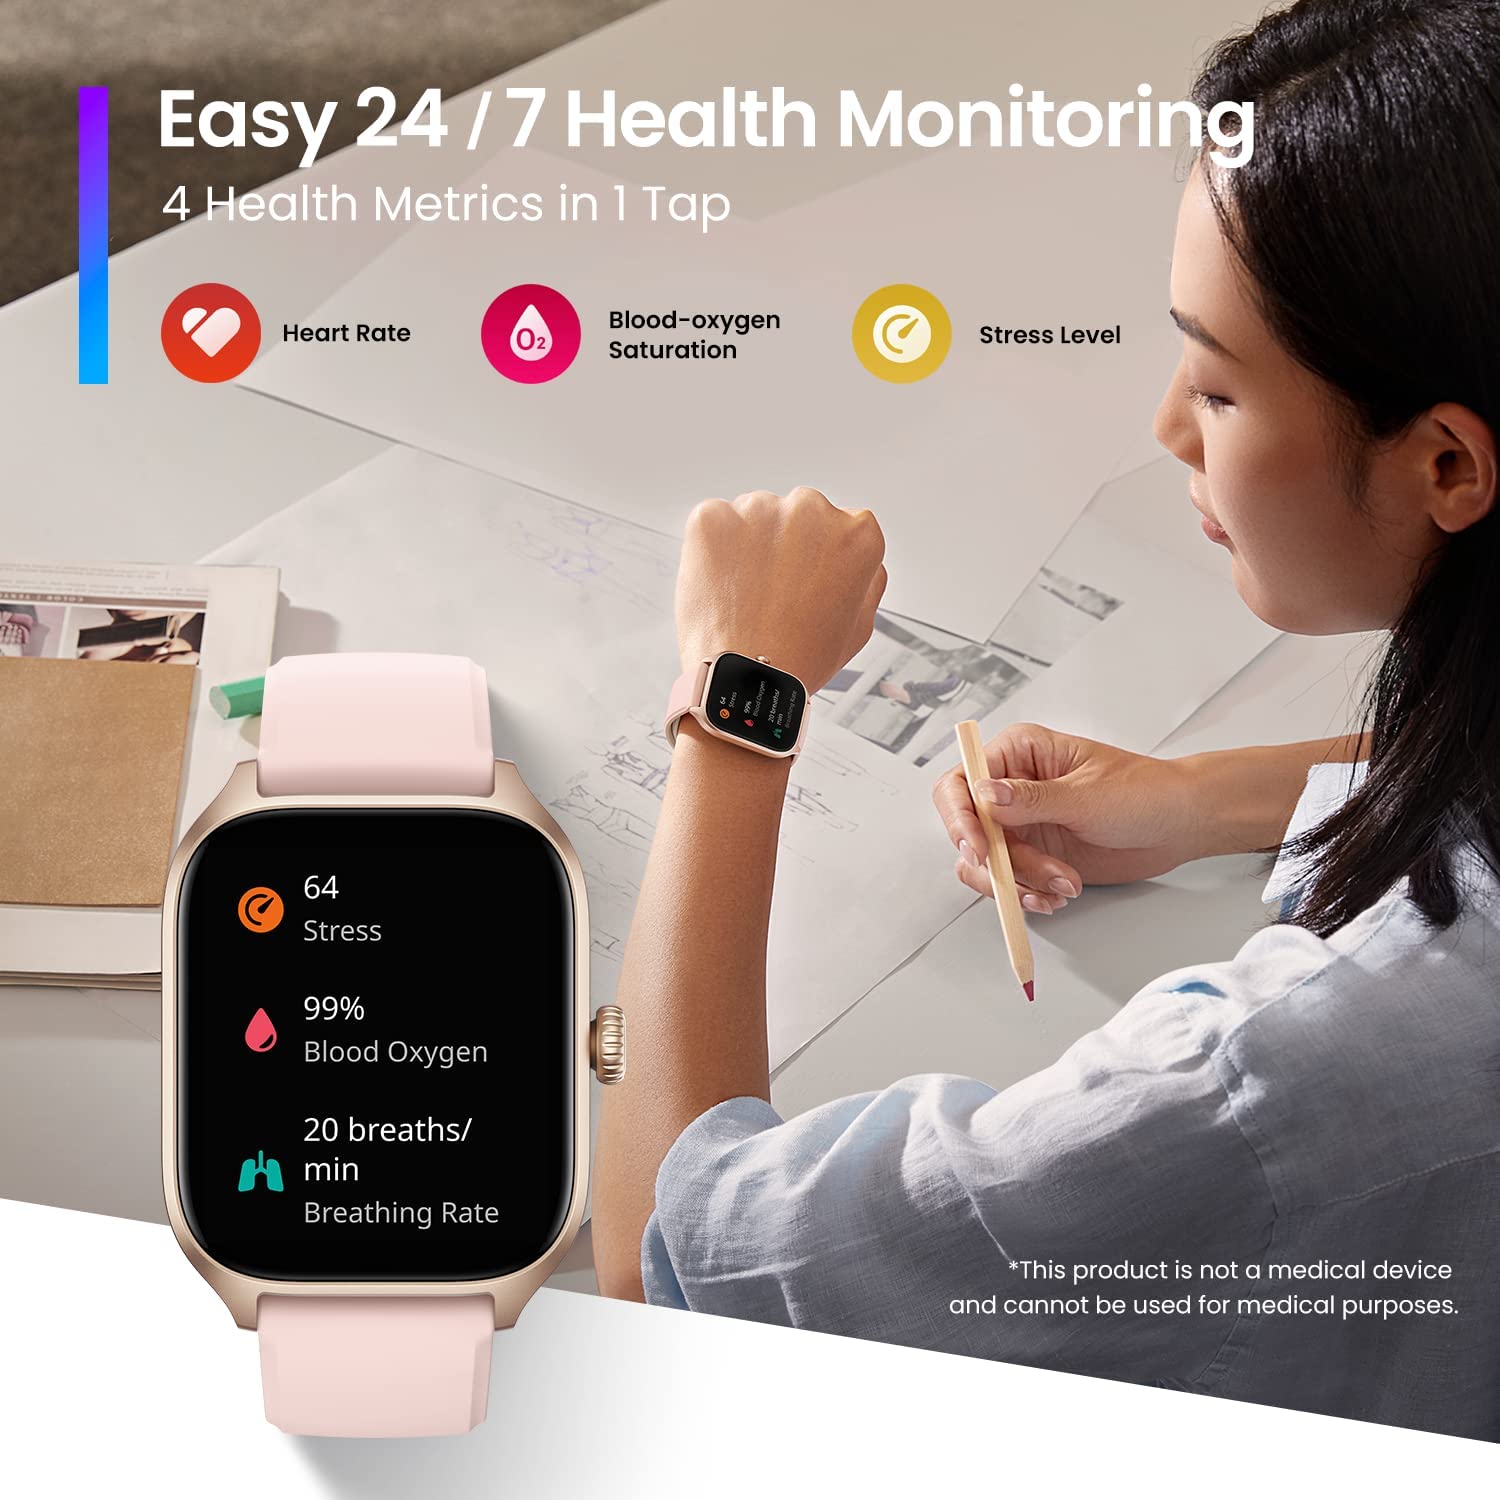 Amazfit GTS 4 Smart Watch for Women, Dual-Band GPS, Alexa Built-in, Bluetooth Calls, 150+ Sports Modes, Heart Rate SPO₂ Monitor, 1.75” AMOLED Display, Health Fitness Watch for Android iPhone, Pink